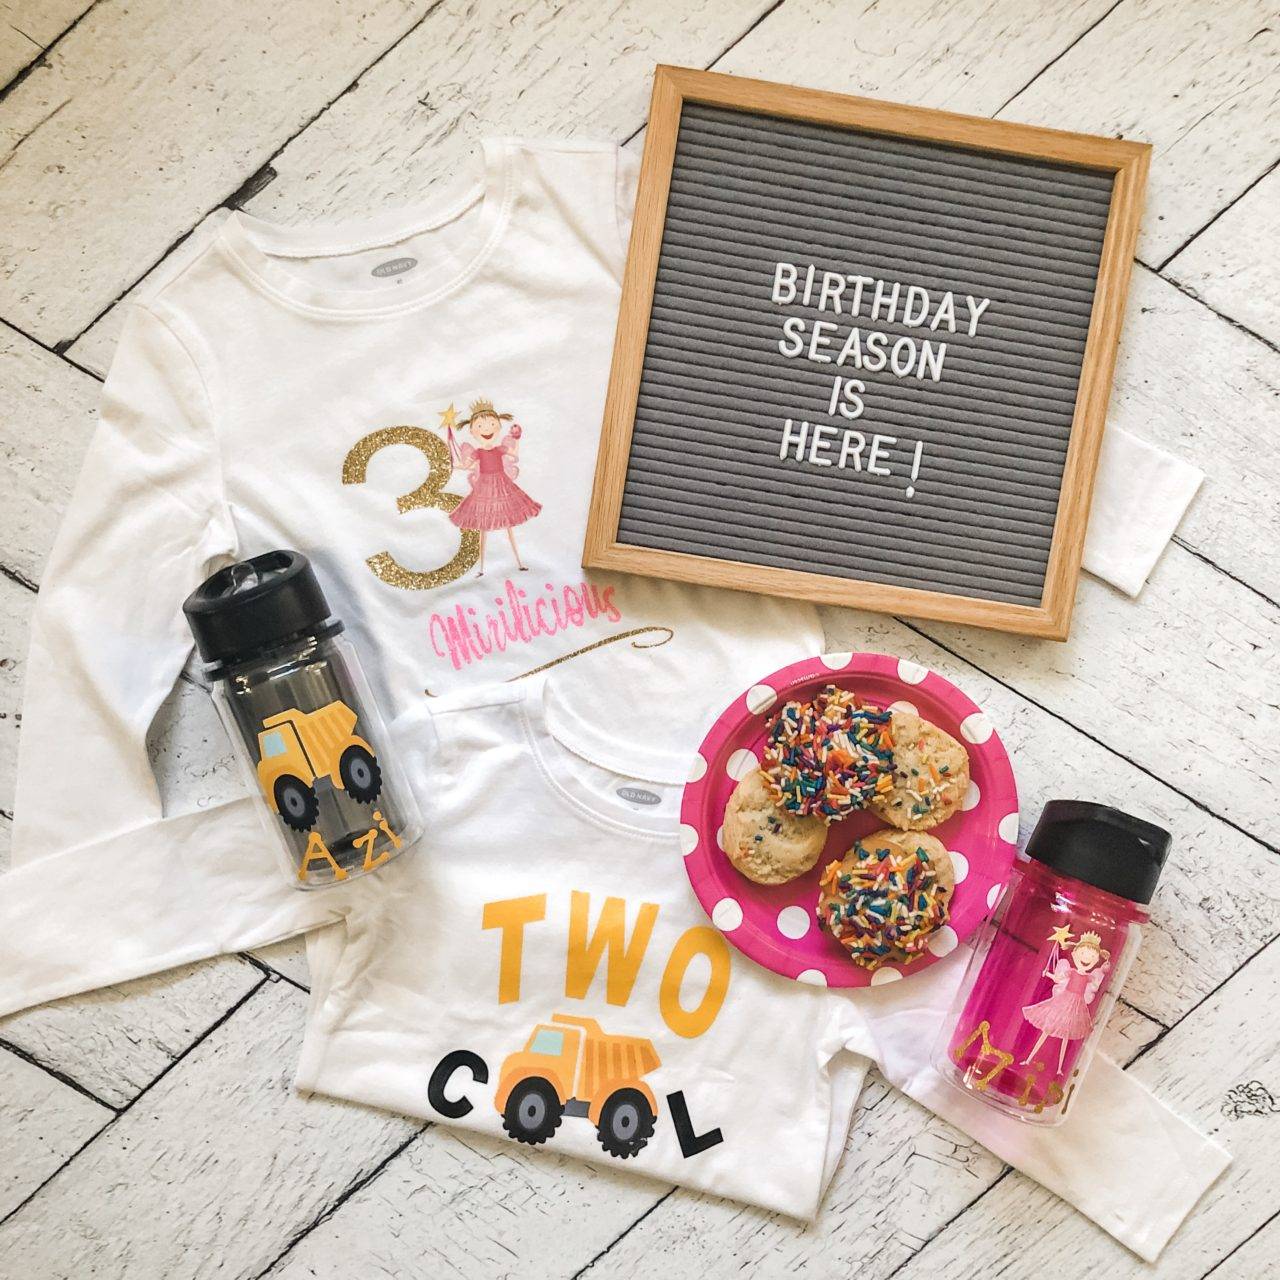 Our Family Birthday Traditions and the Kids’ Birthday Wishlists